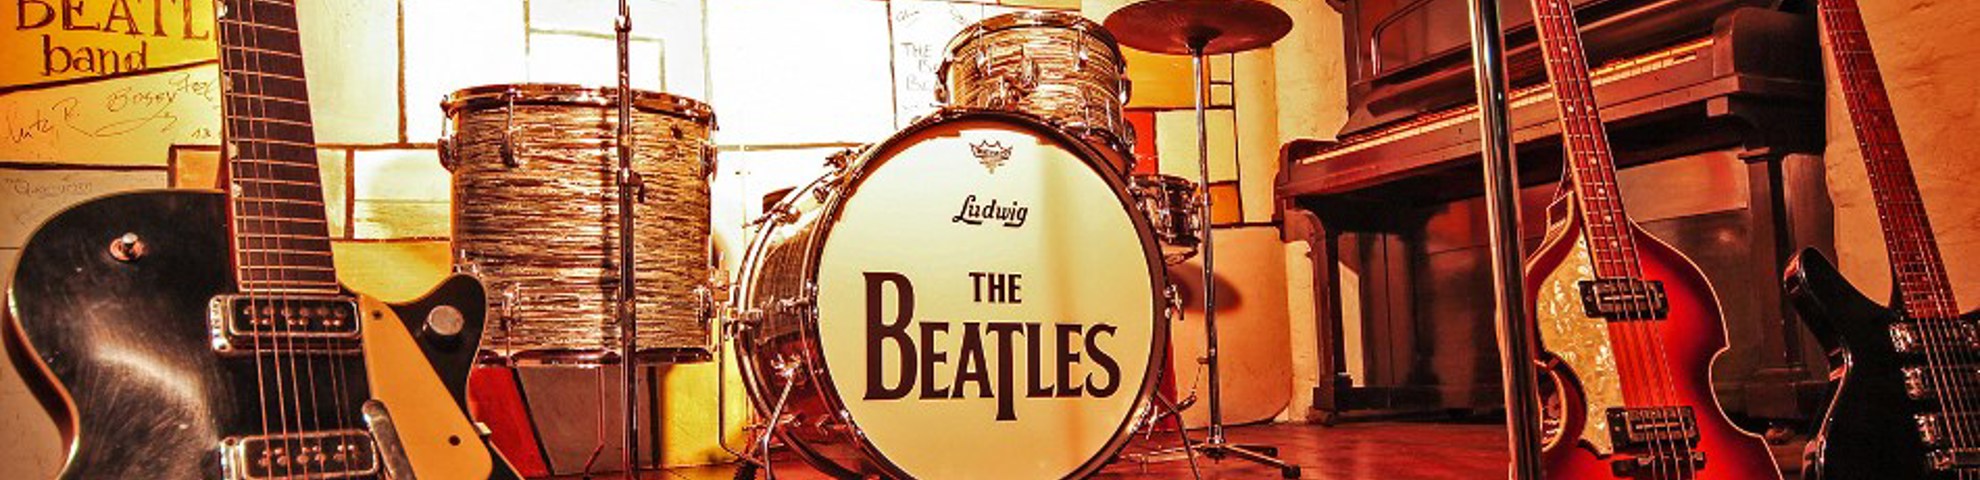 Band instruments on stage. The drum kit has 'The Beatles' written on it.